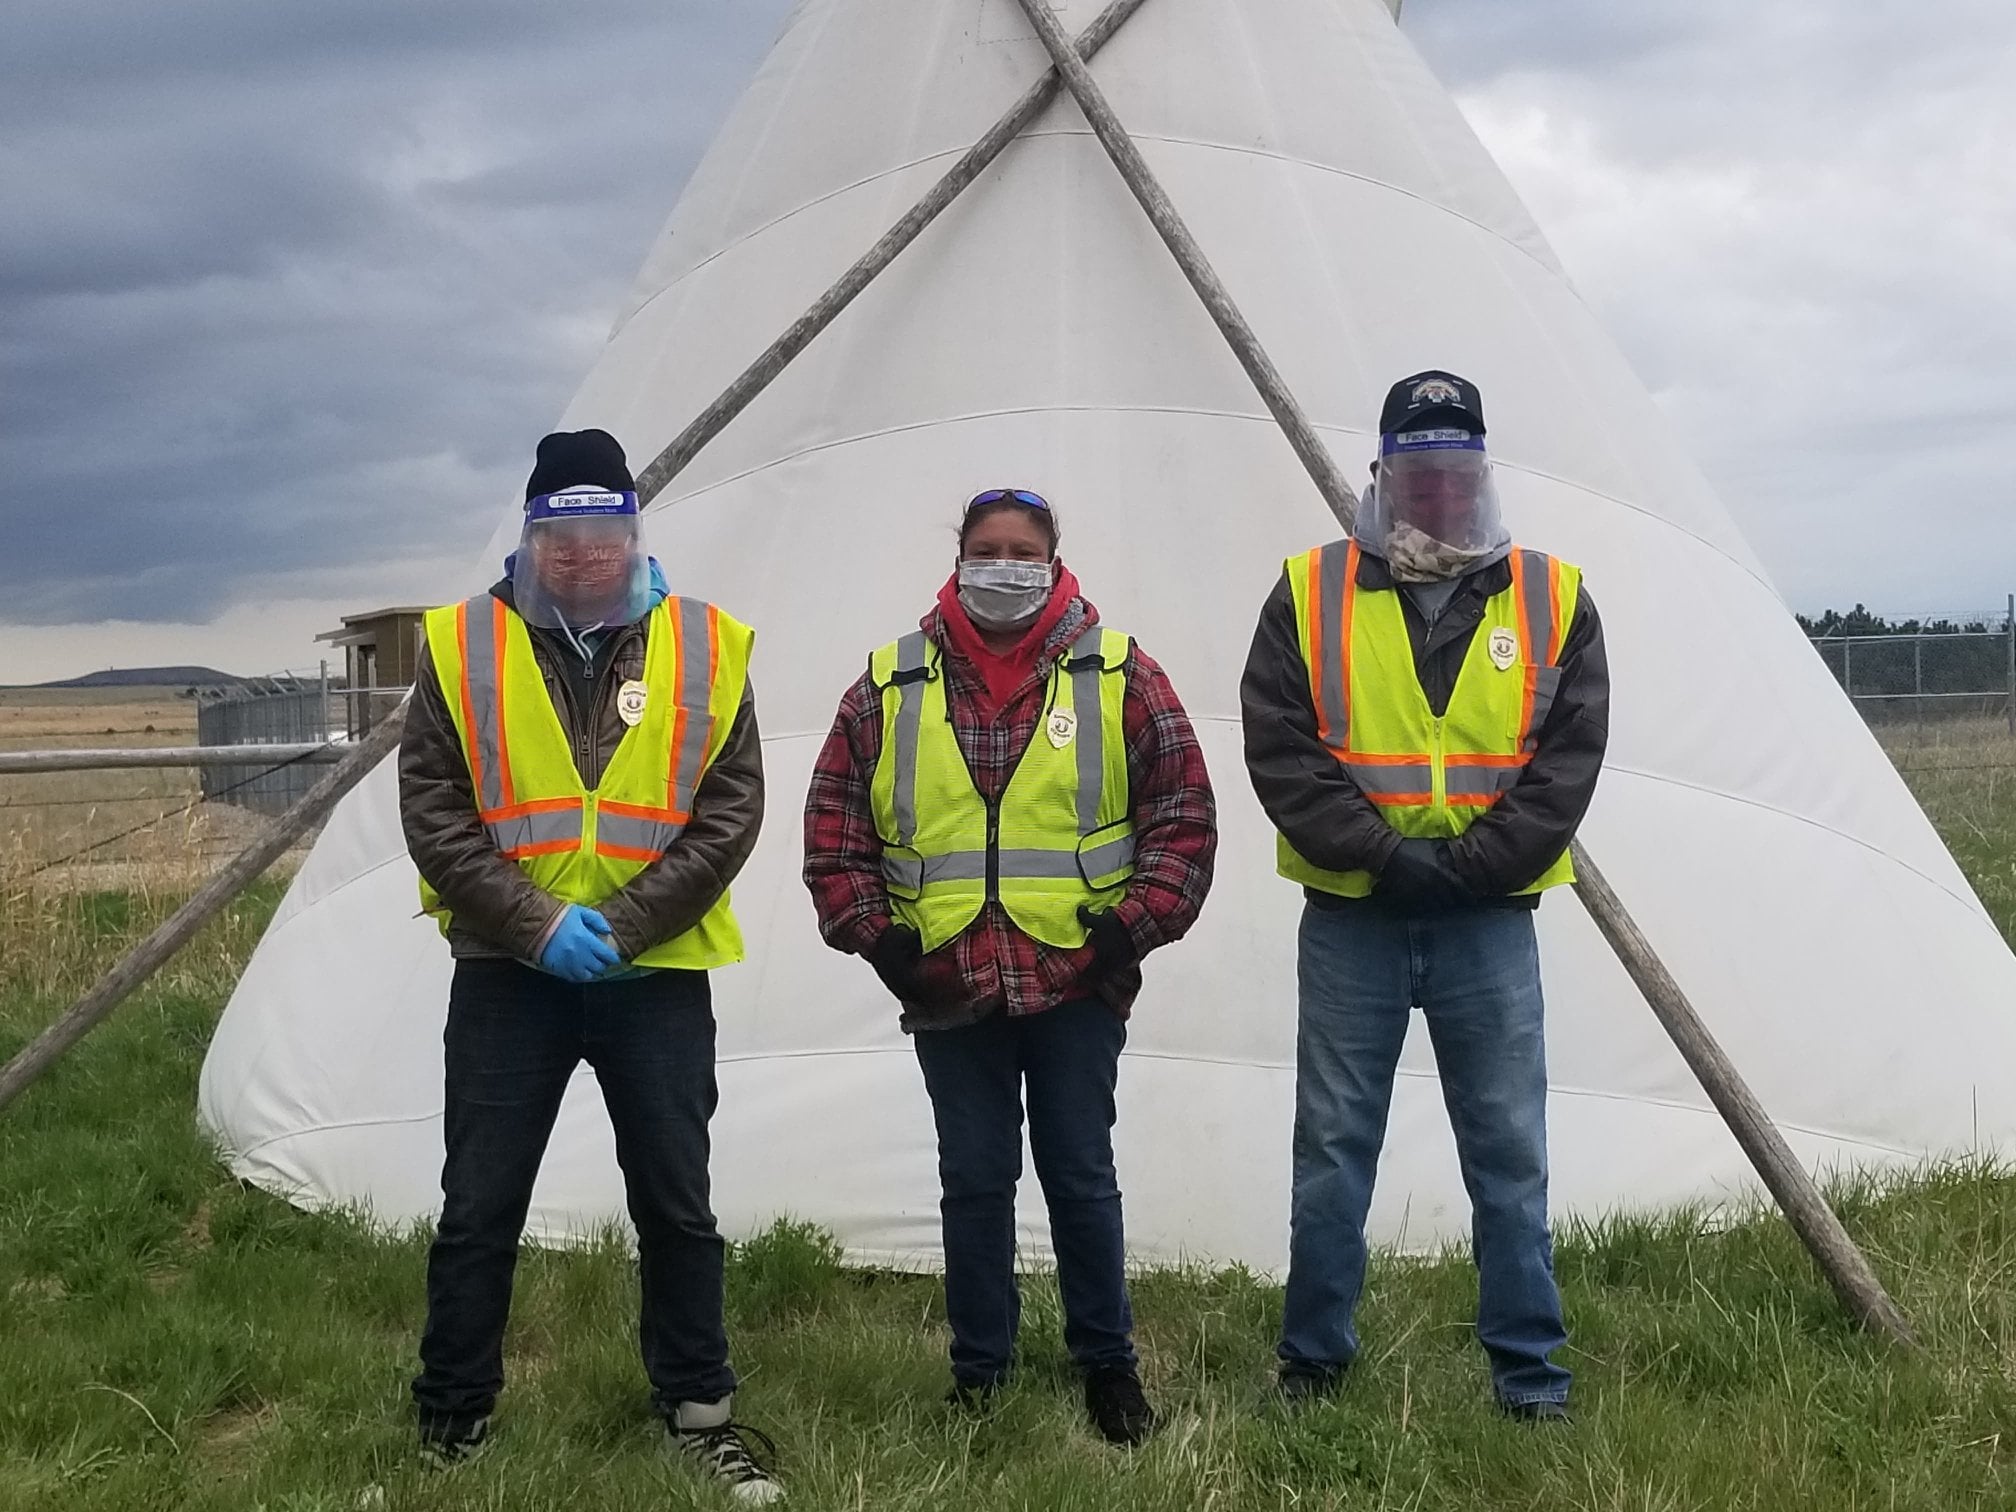 Three Cheyenne River Sioux Tribe checkpoint deputies look safe and strong in reflective safety vests and their PPE image from Protect Native Elders Facebook page